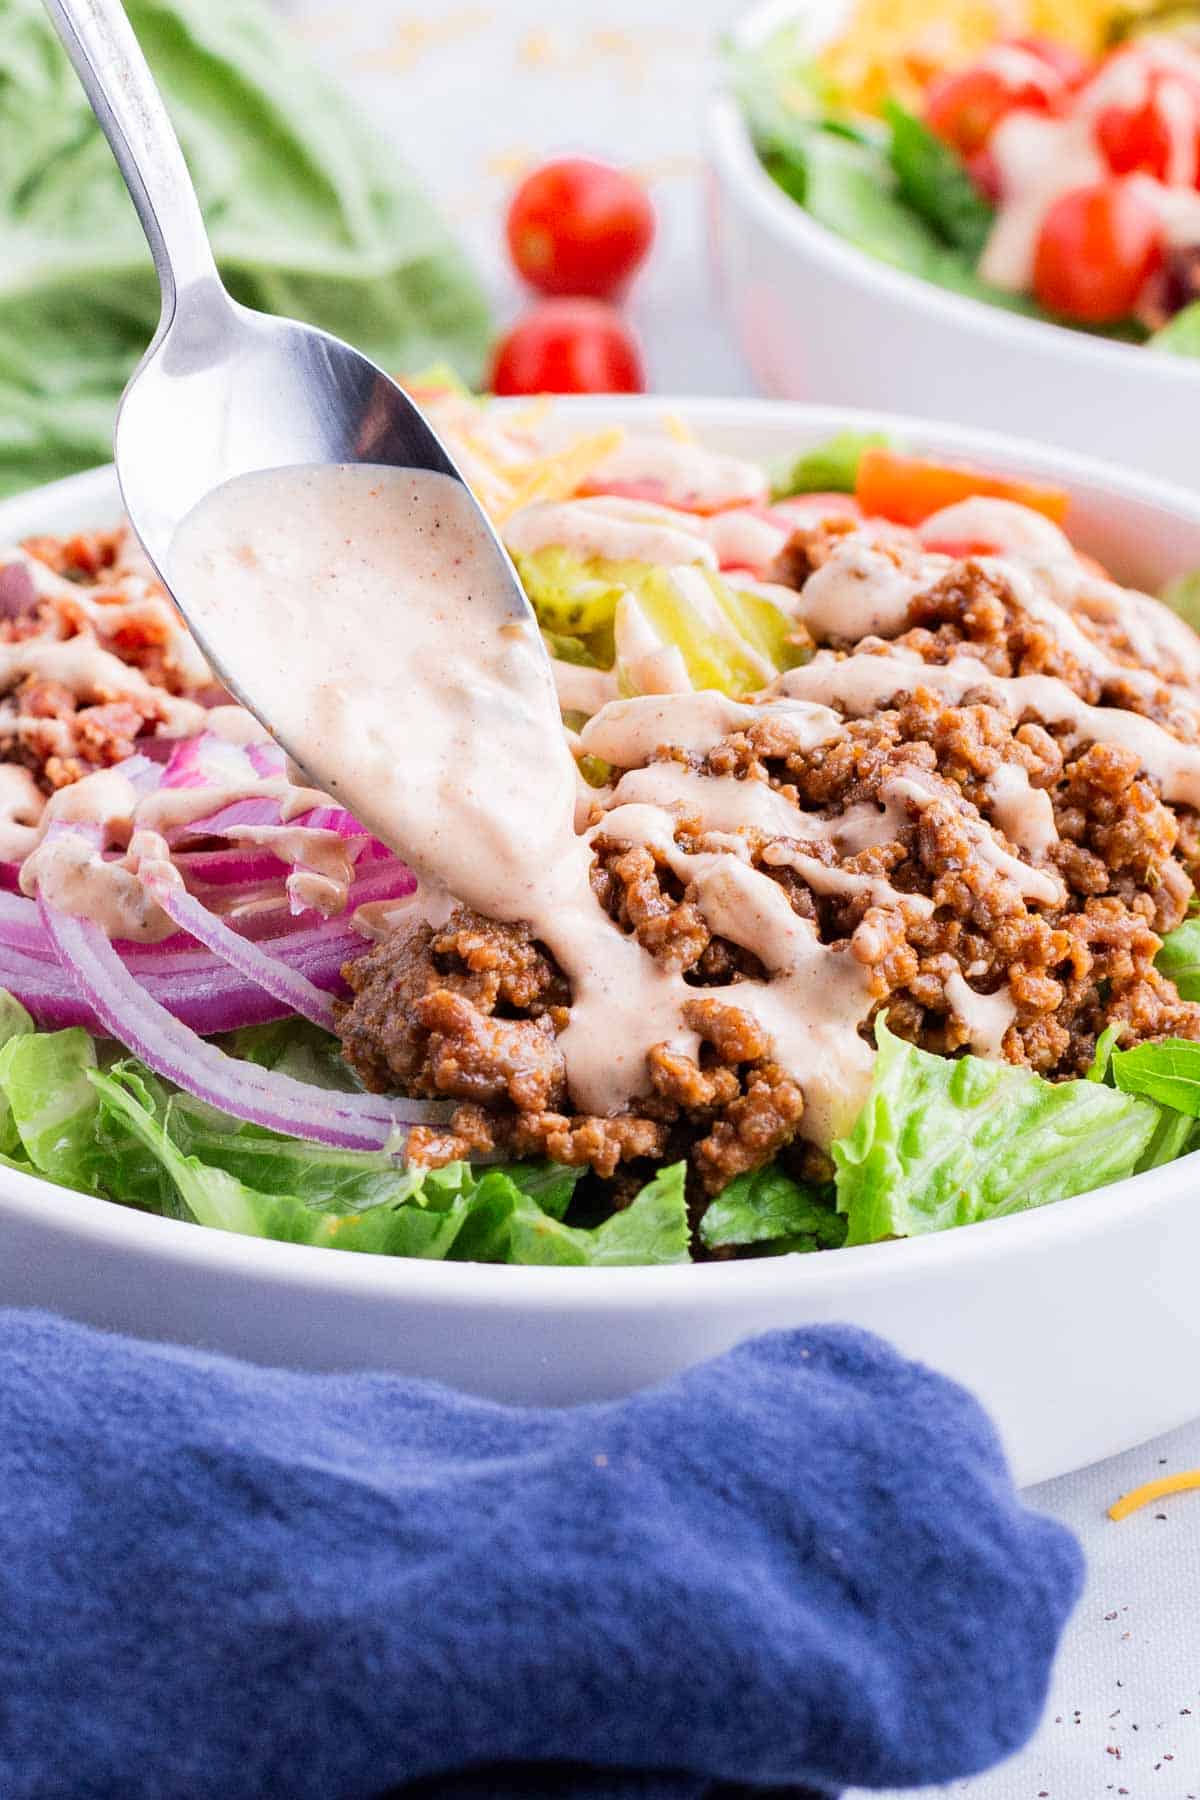 A spoon drizzles burger sauce over the bowl.